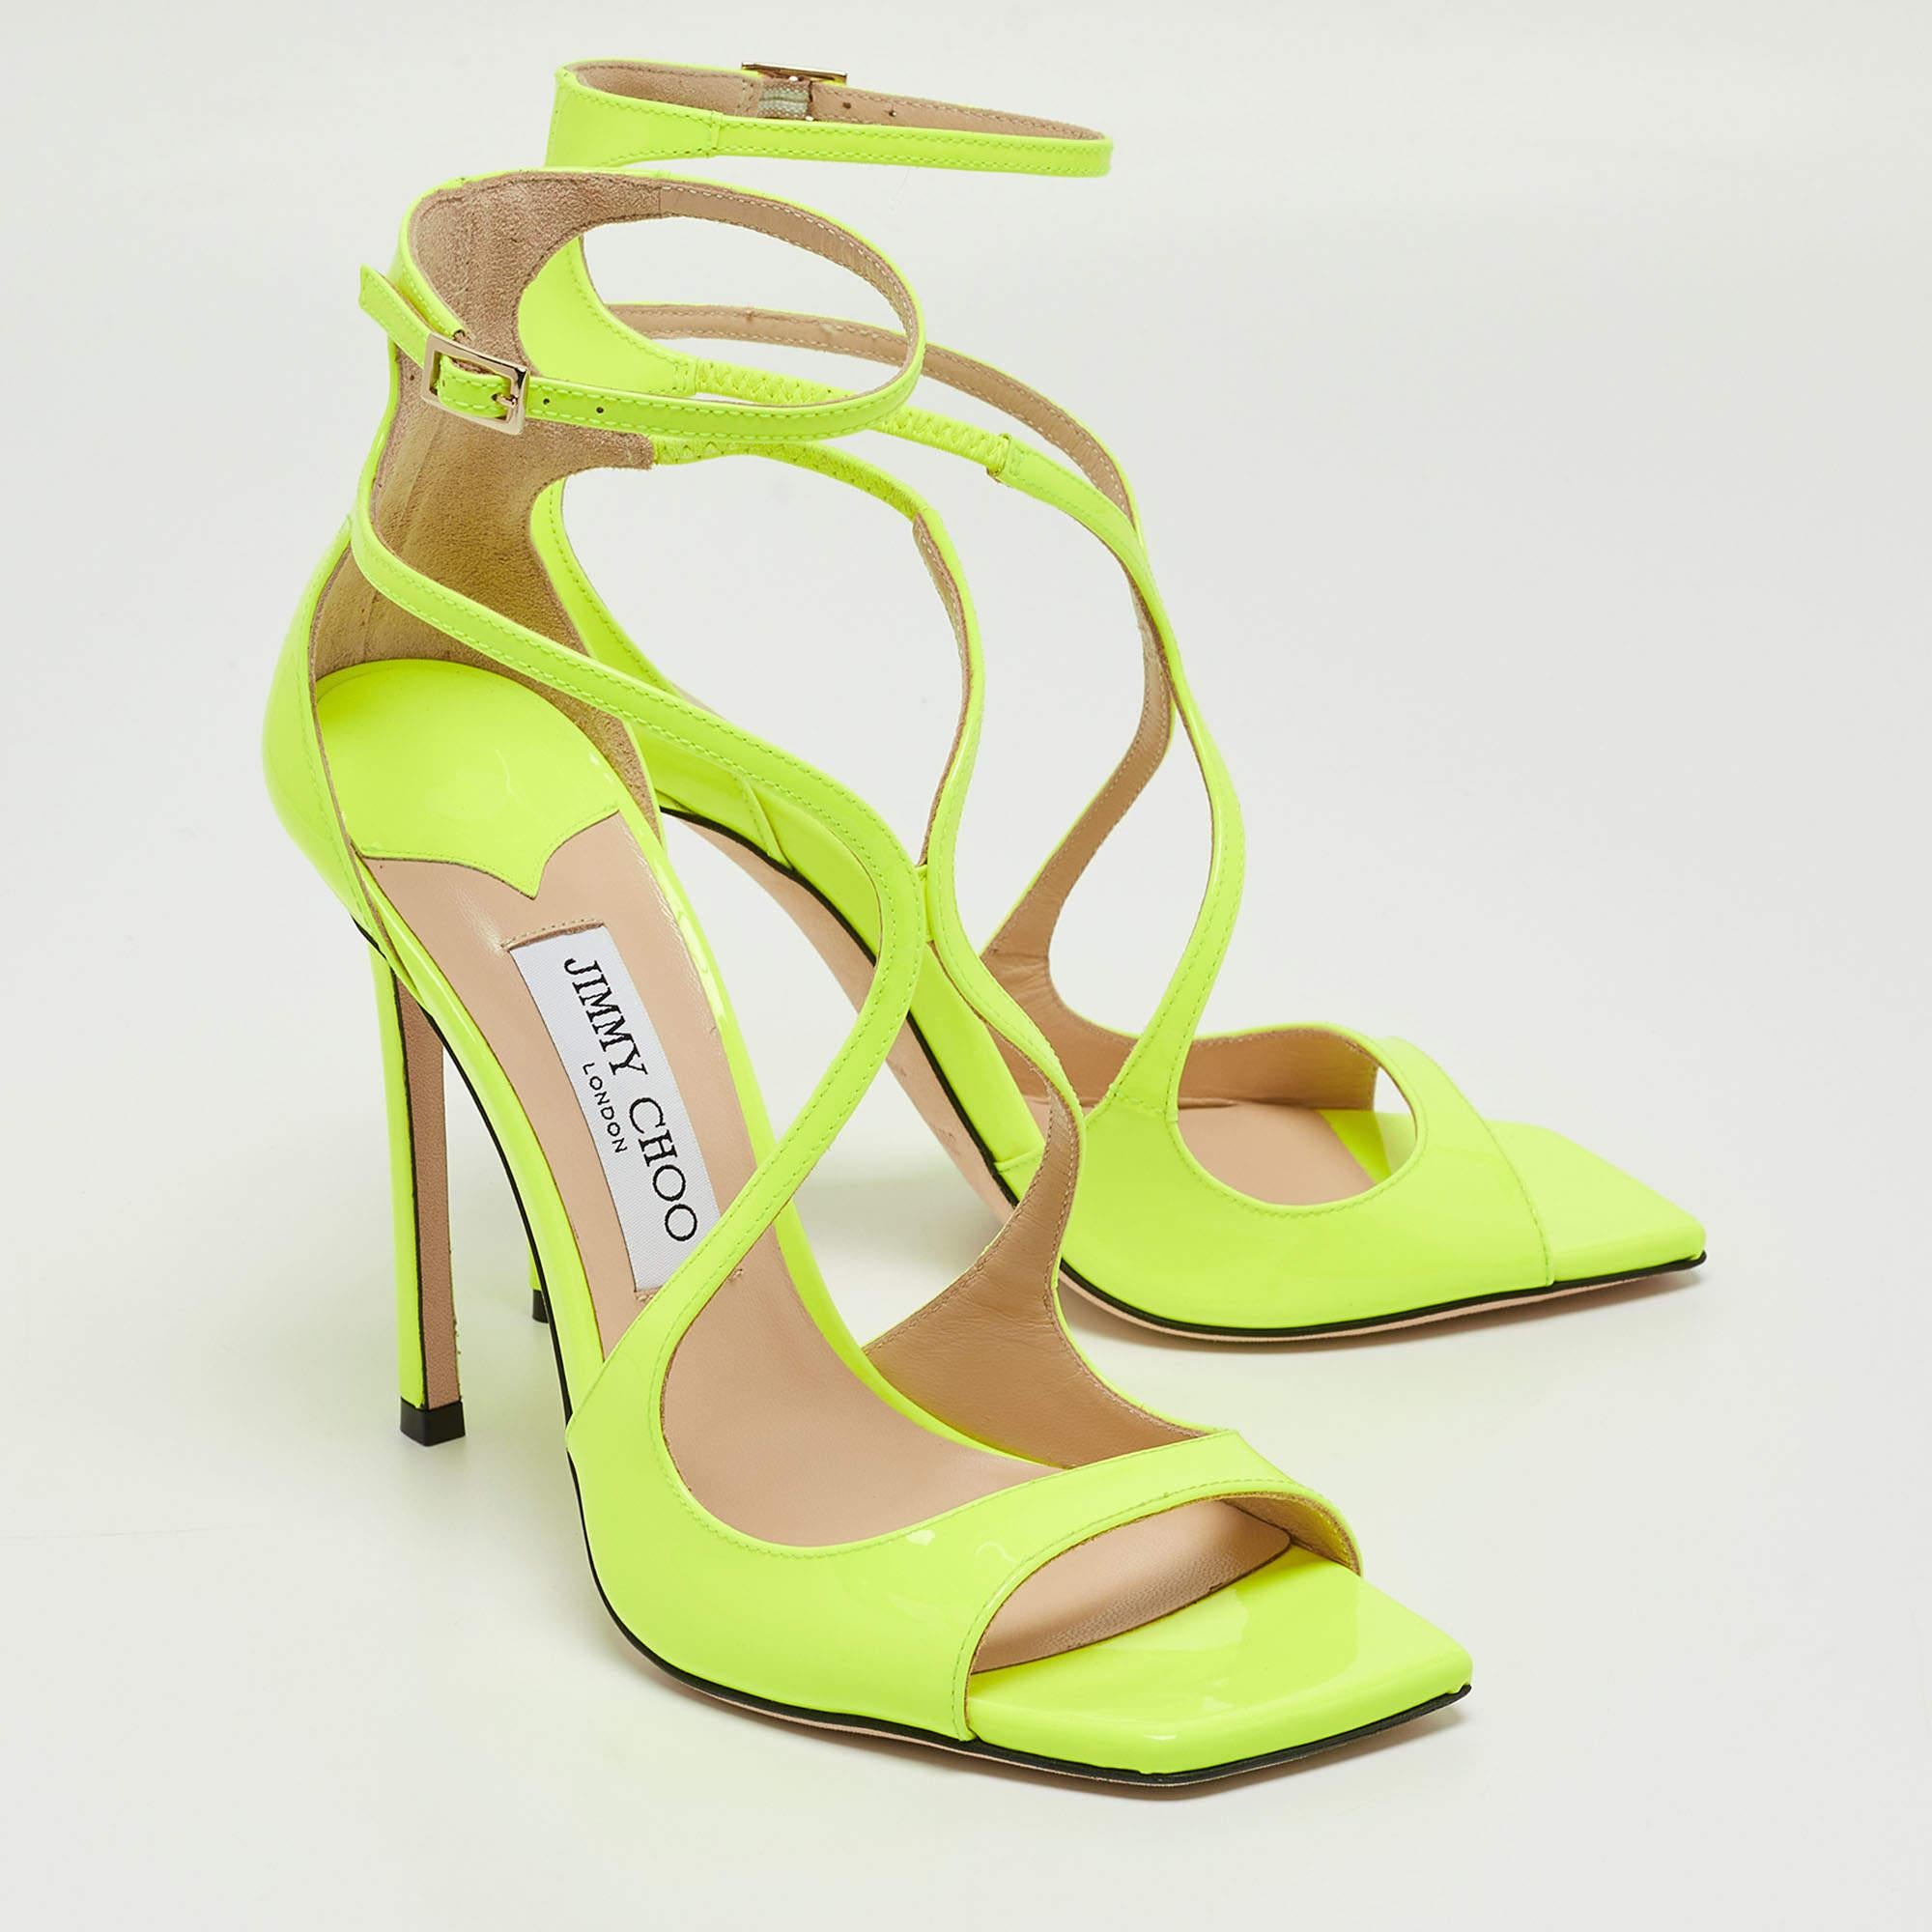 Women's Jimmy Choo Neon Yellow Patent Leather Azia Ankle Strap Sandals Size 38